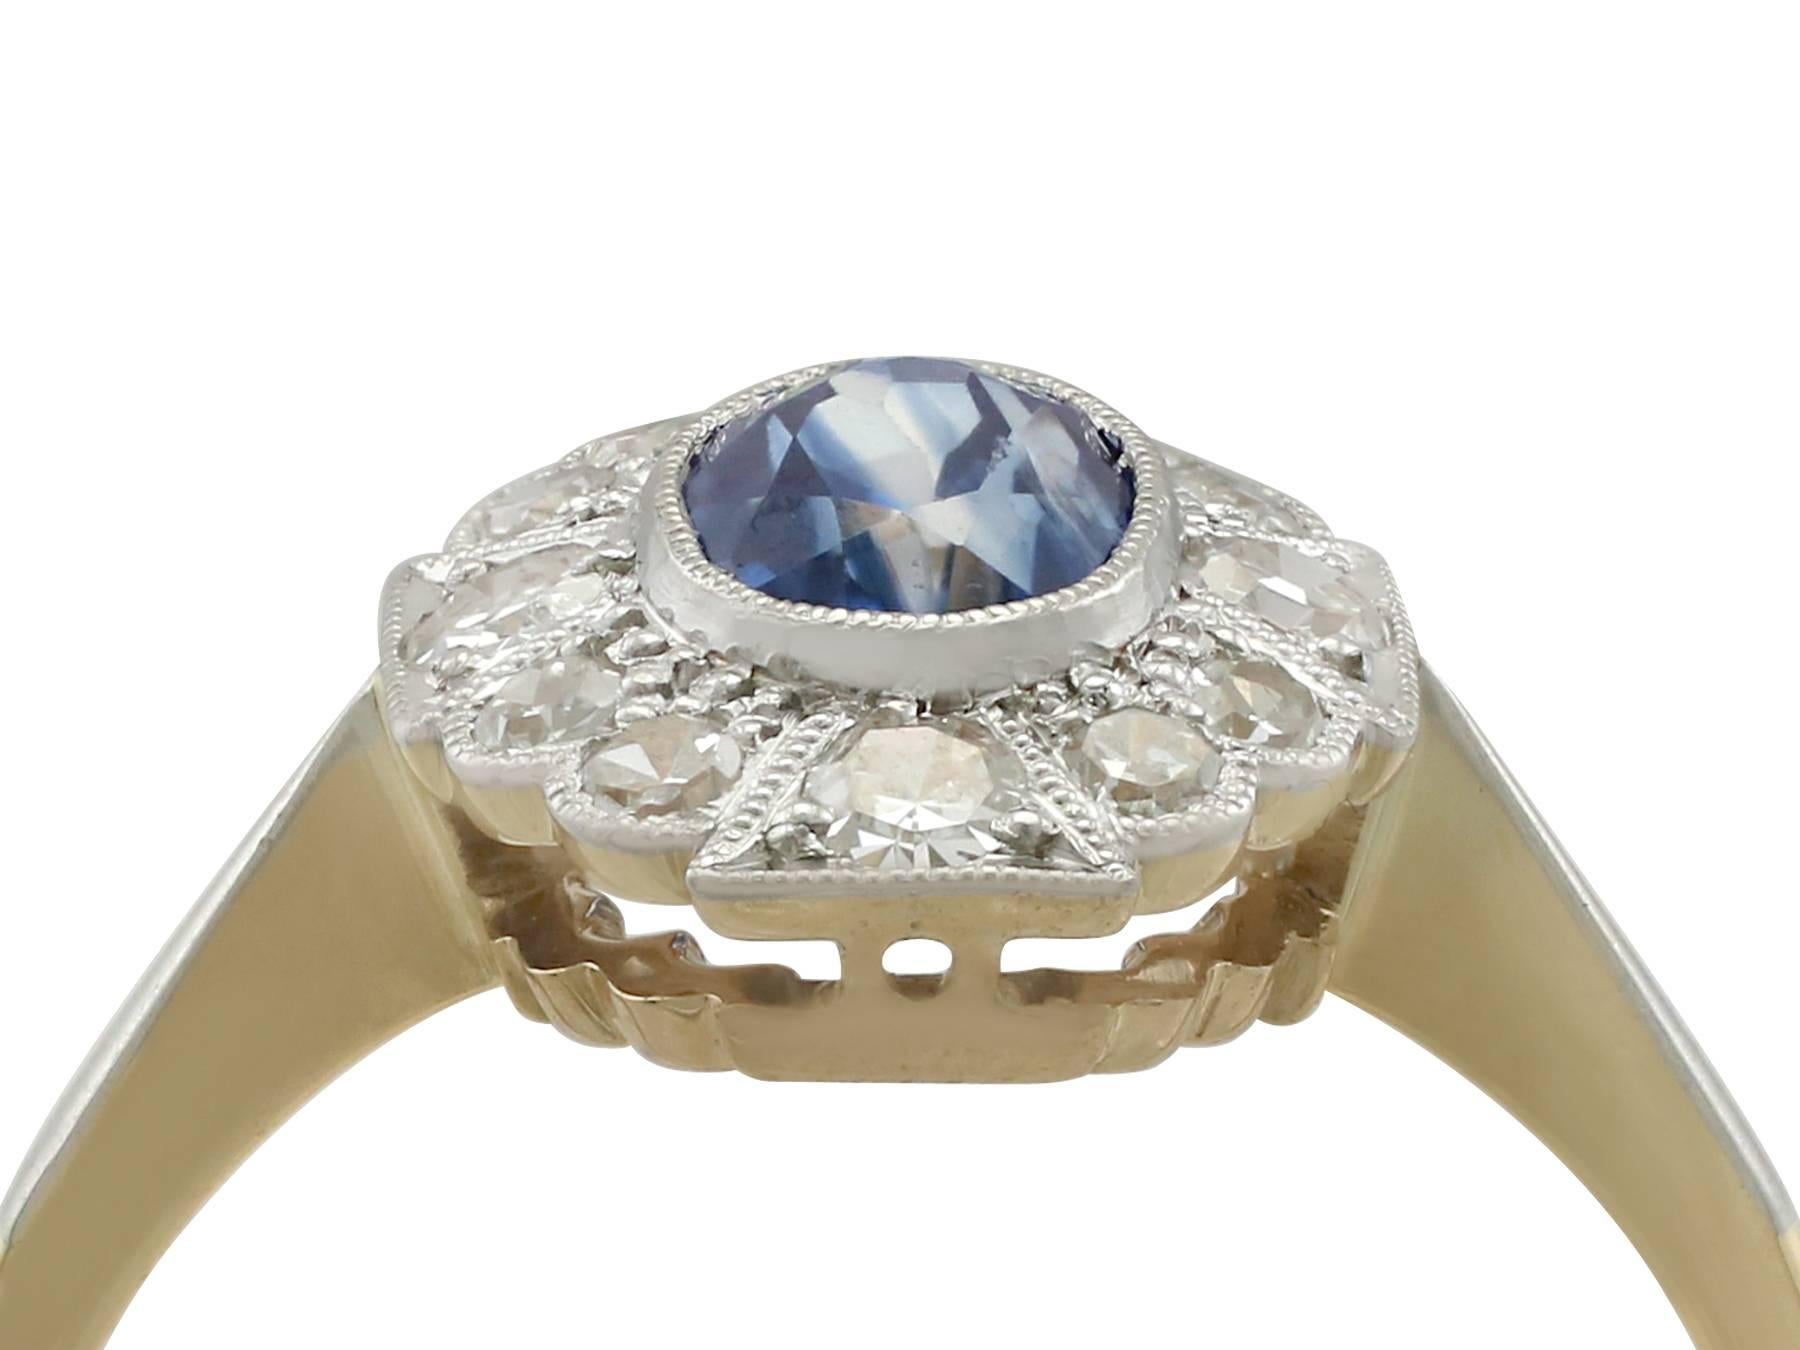 A fine and impressive 0.43 carat sapphire and 0.25 carat diamond, 18 karat yellow gold and platinum set cocktail ring; part of our diverse antique jewelry and estate jewelry collections

This fine and impressive oval sapphire and diamond ring has